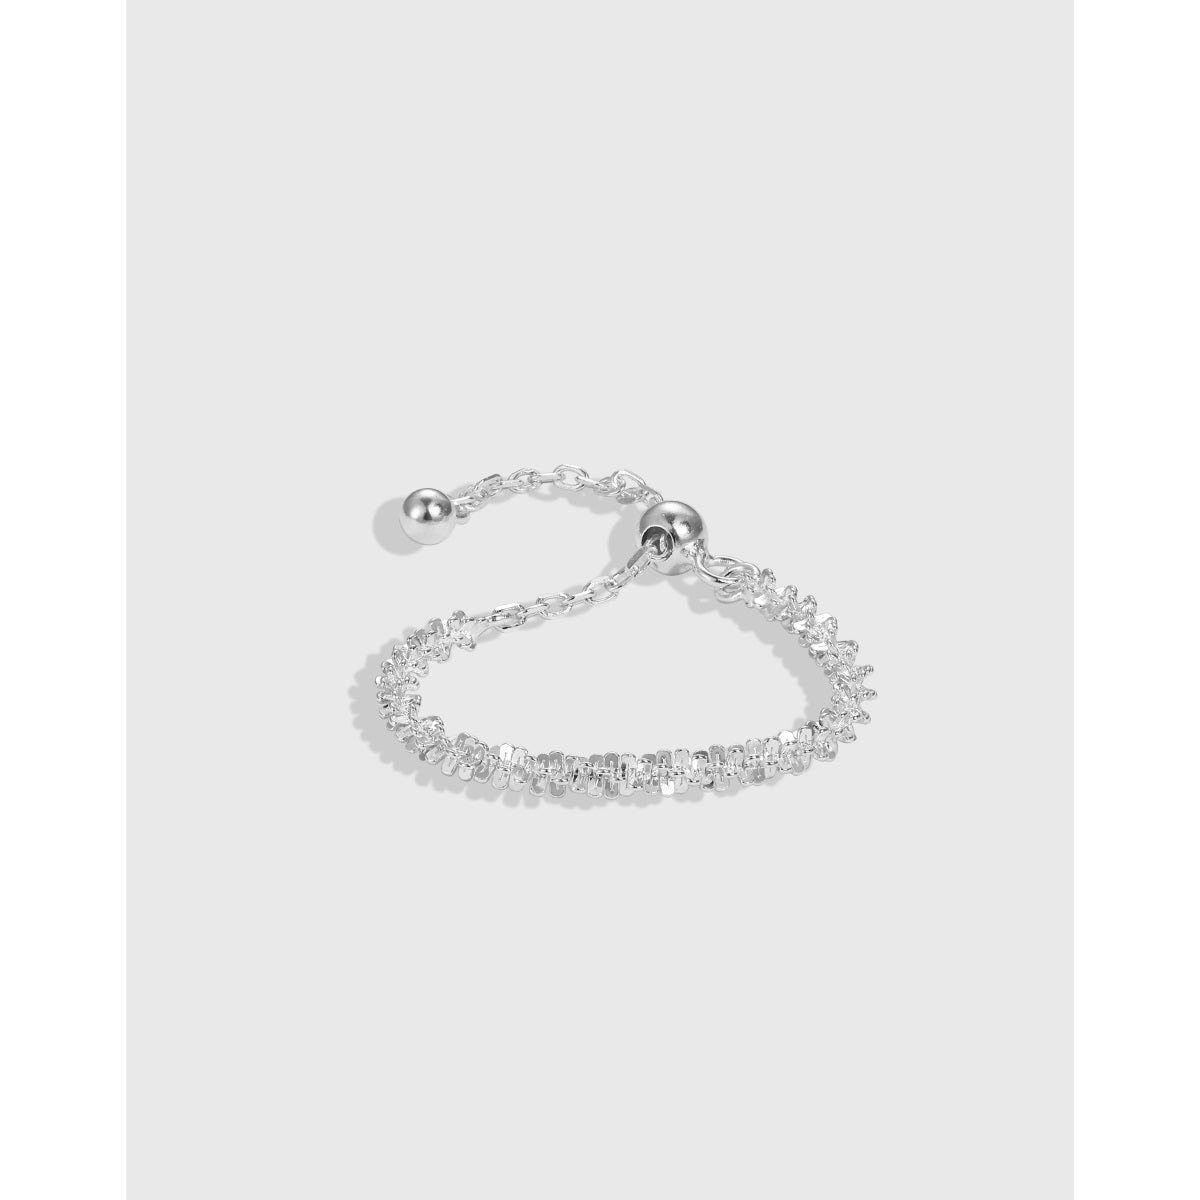 Women's 925 Silver Chain Ring Simple Adjustable Size - Jewelry - EM Accessories - 925 silver - new - SILVER-0015-RING